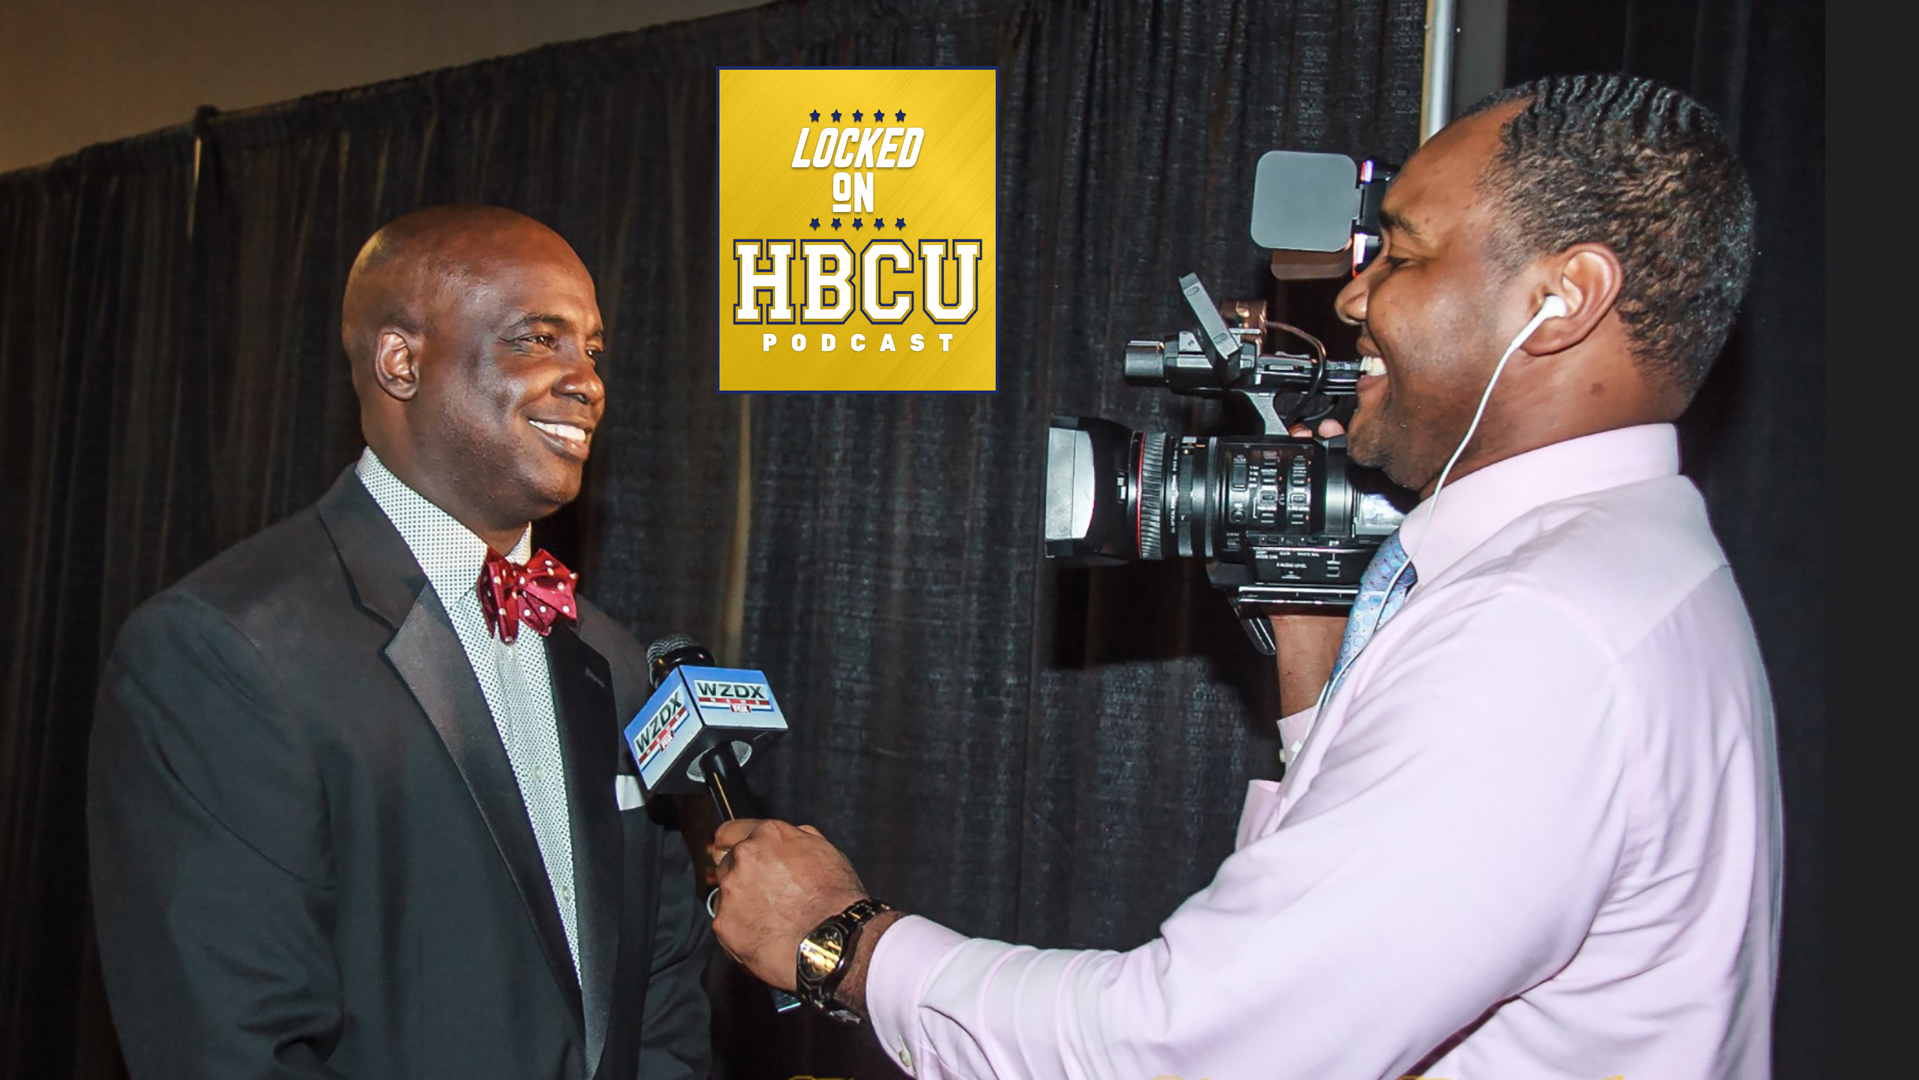 The Locked On HBCU podcast tackles underreported stories